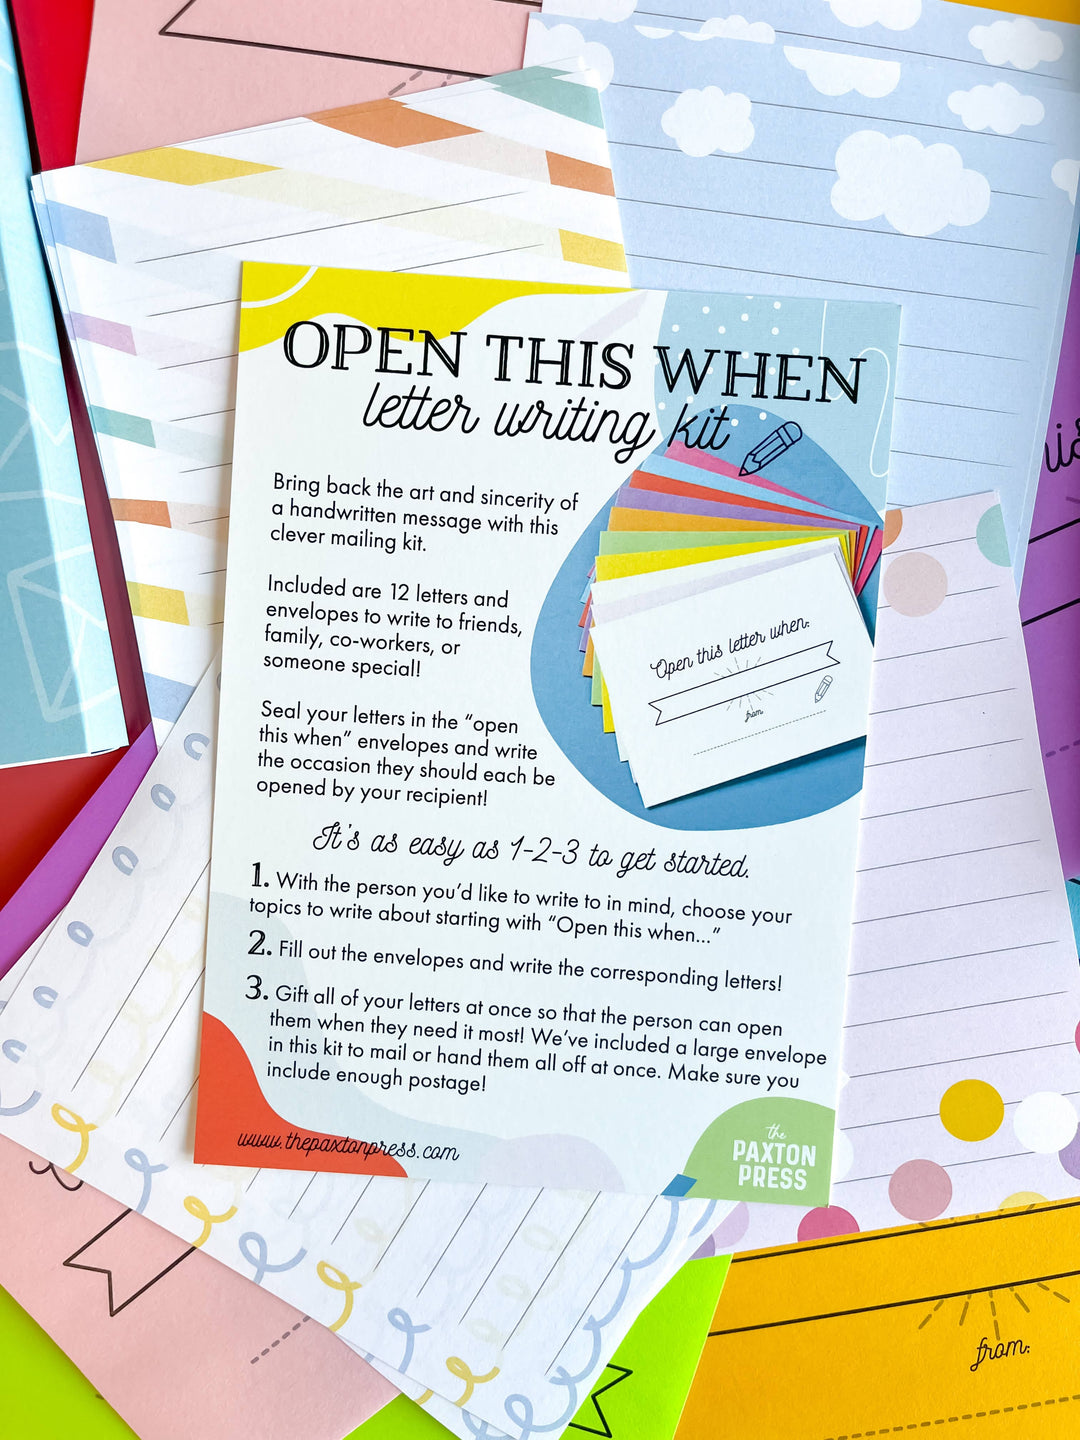 The Paxton Press Stationery Set "Open This When" Letter Writing Kit